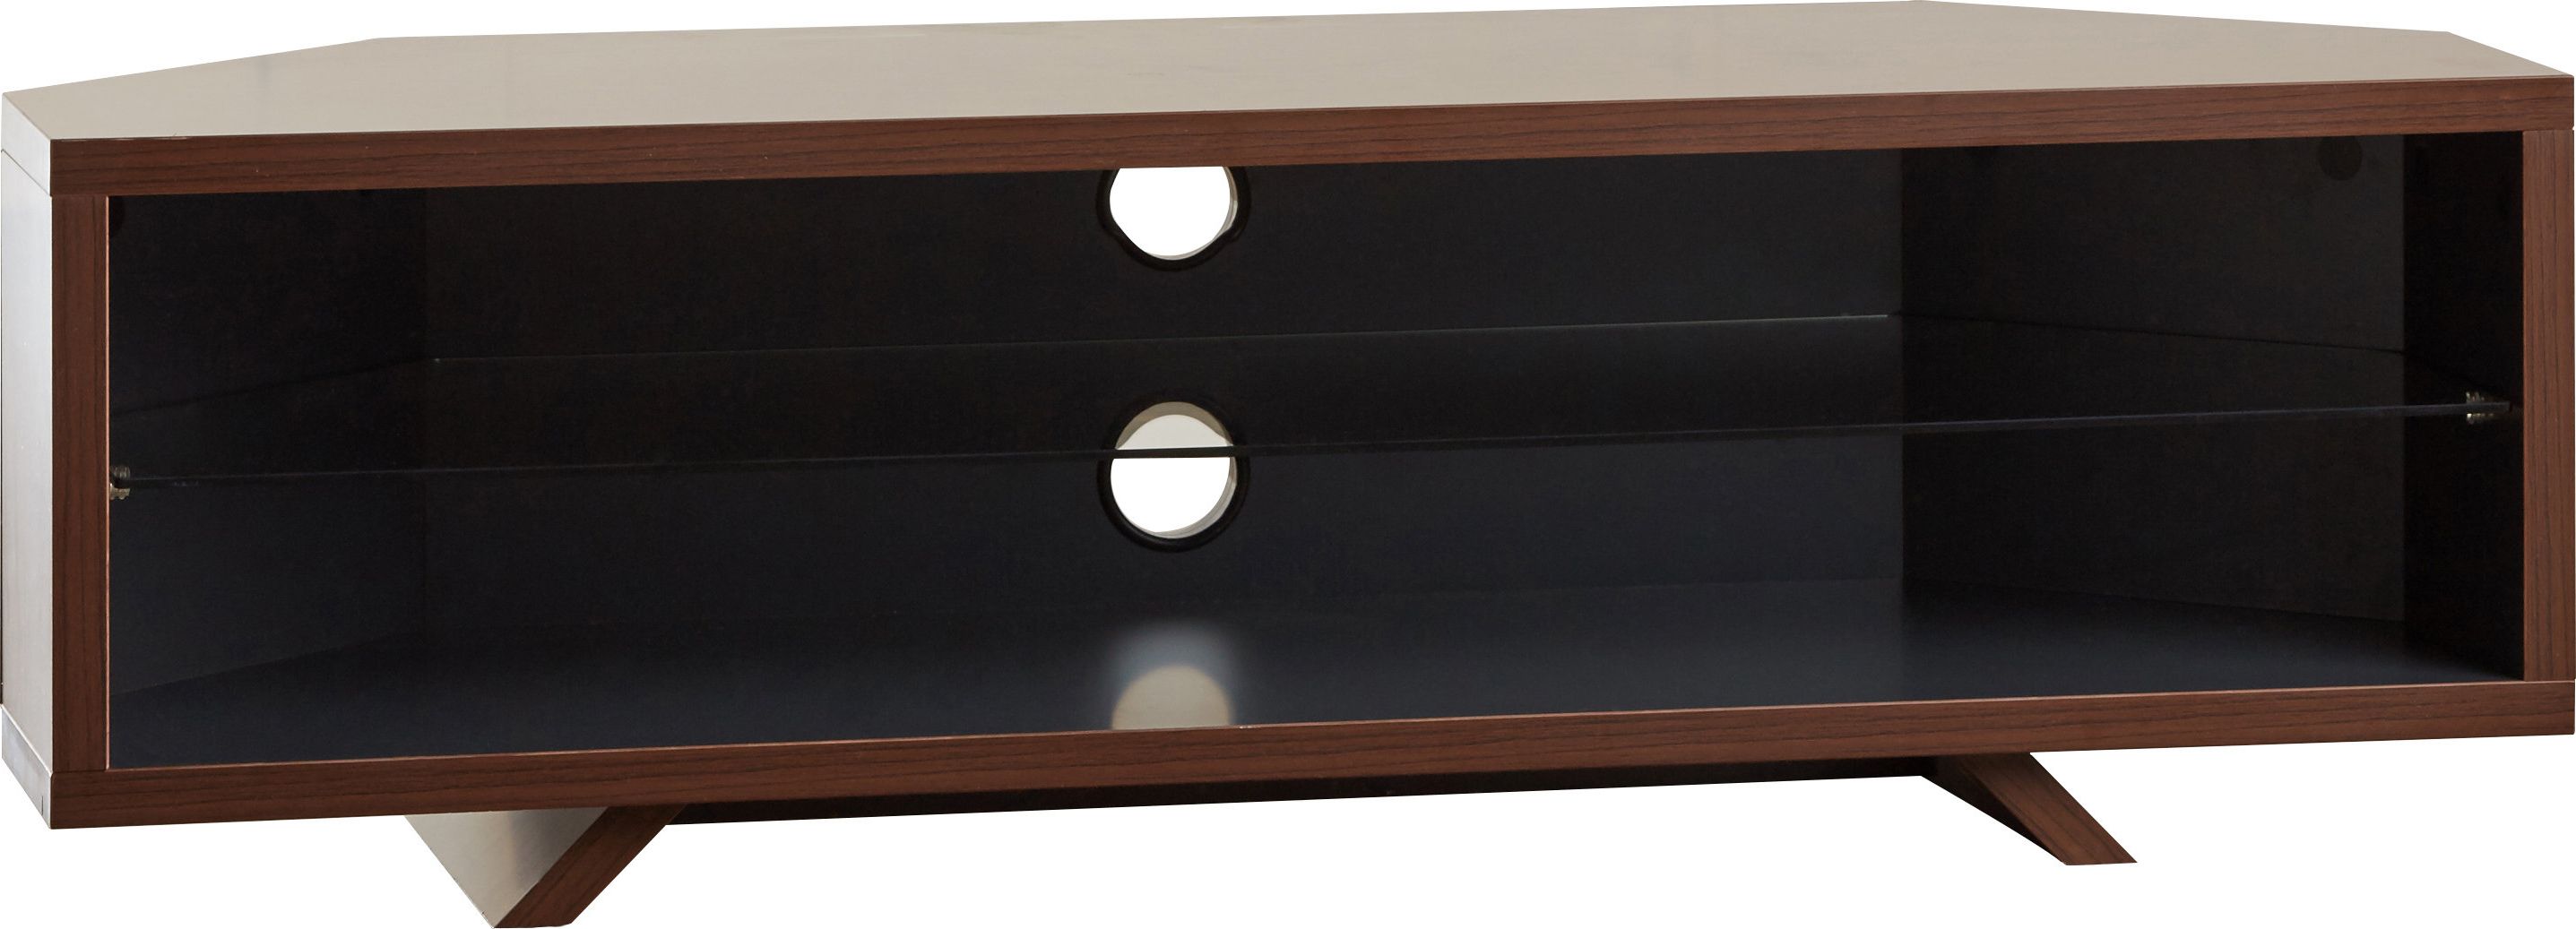 Most Recent Techlink Tv Stands Throughout Techlink Tv Stands & Entertainment Units You'll Love (View 5 of 20)